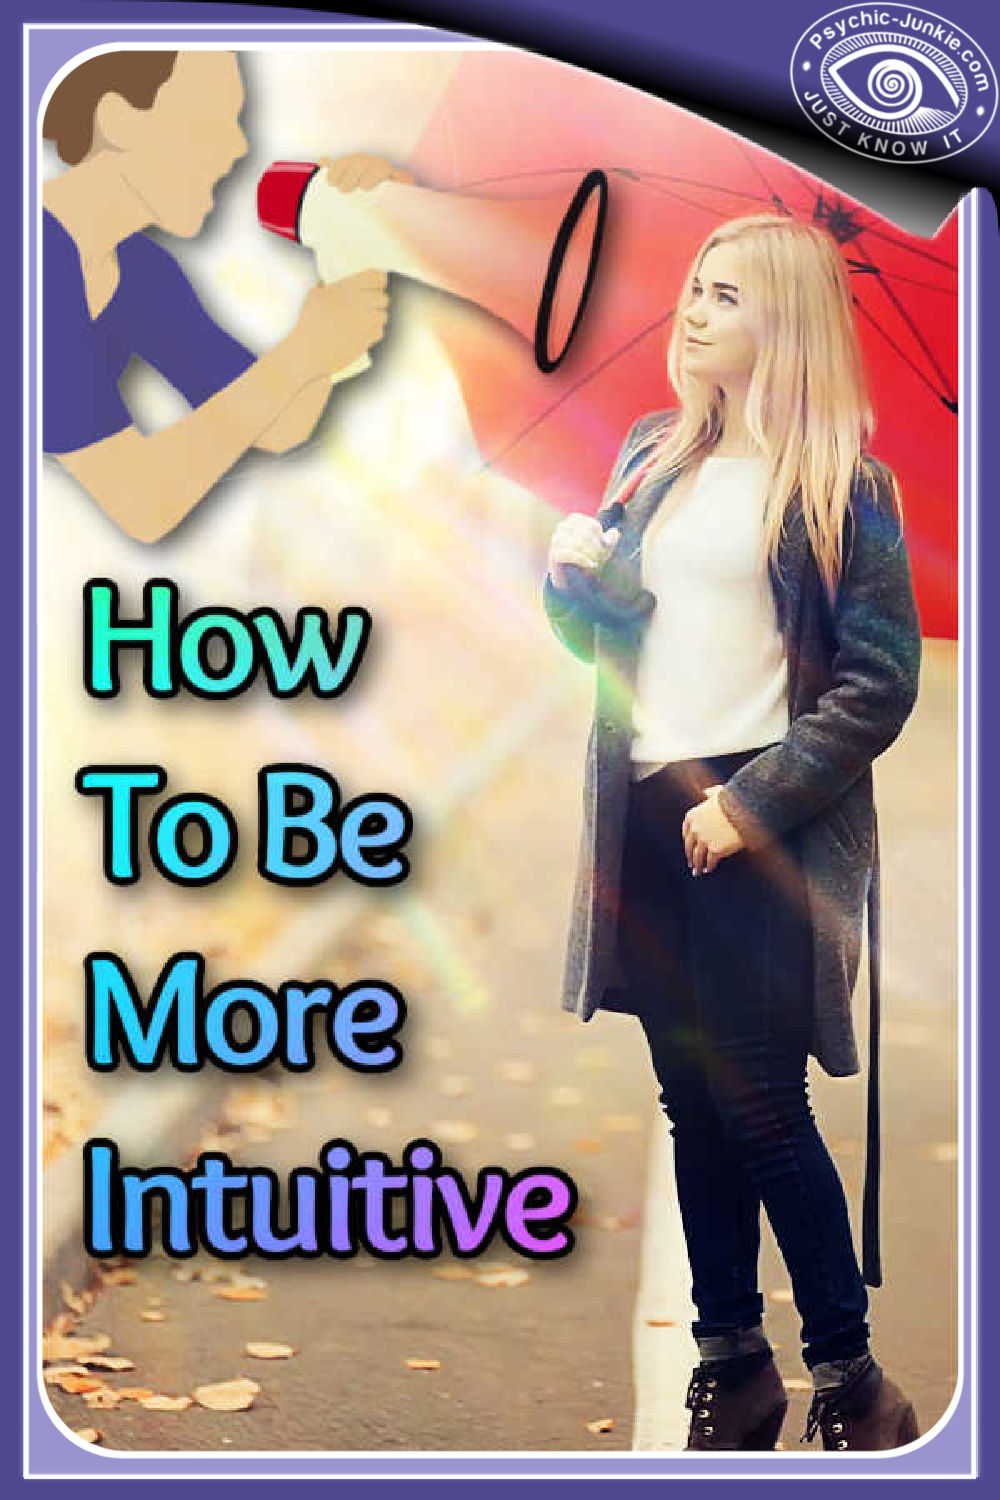 Learn how to be more intuitive with the Five Top Intuitive Tools by Isabeau Maxwell